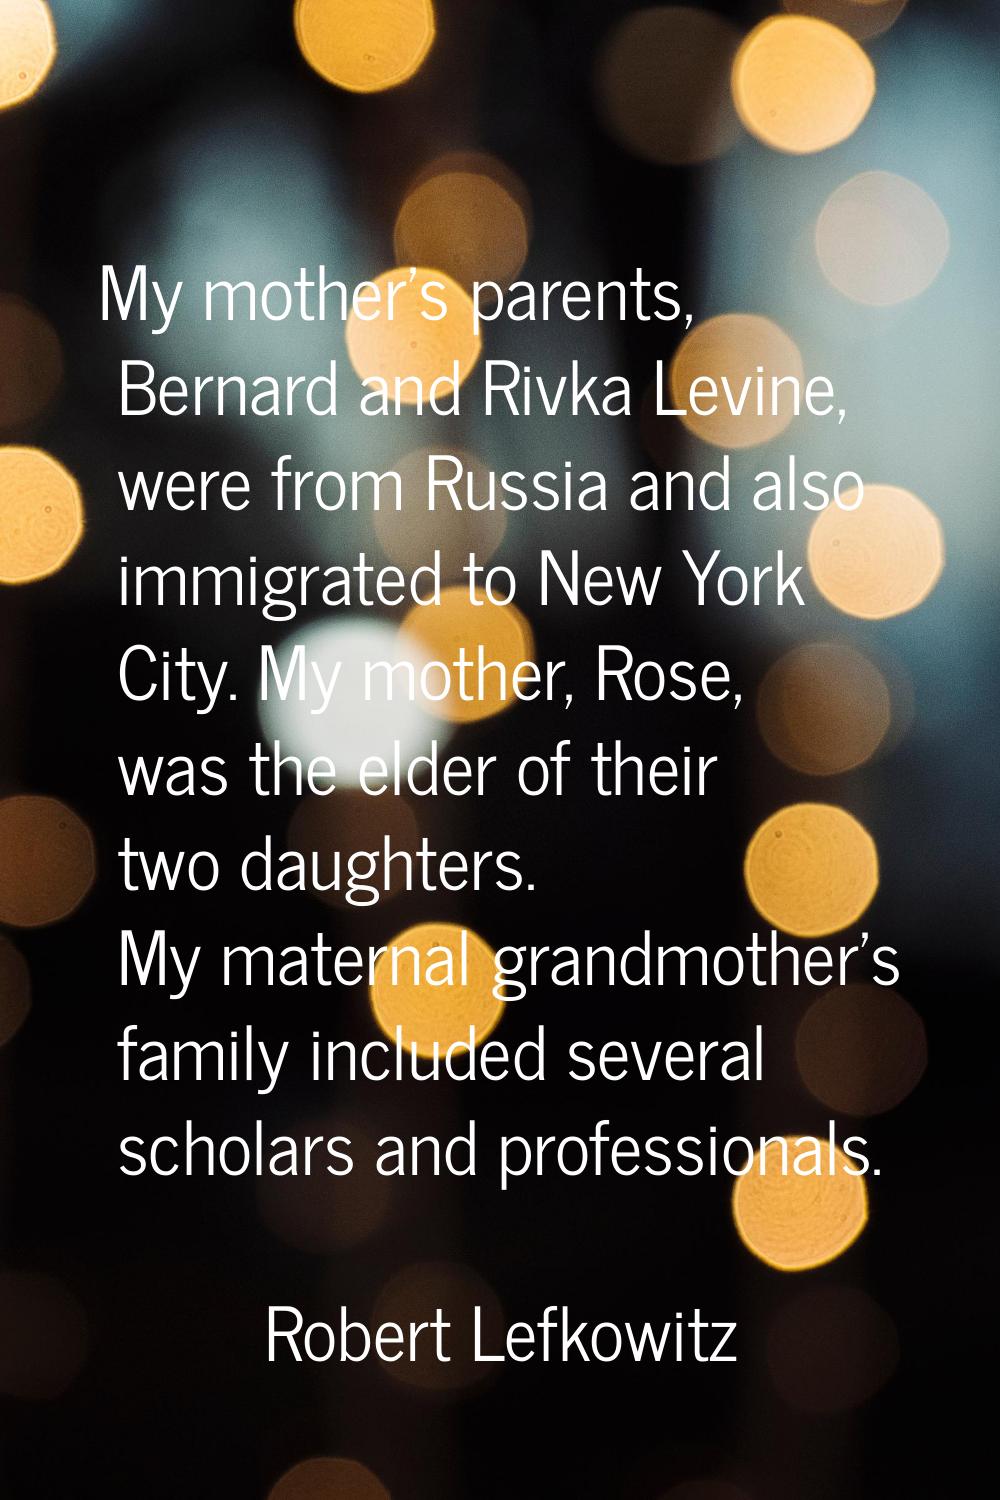 My mother's parents, Bernard and Rivka Levine, were from Russia and also immigrated to New York Cit